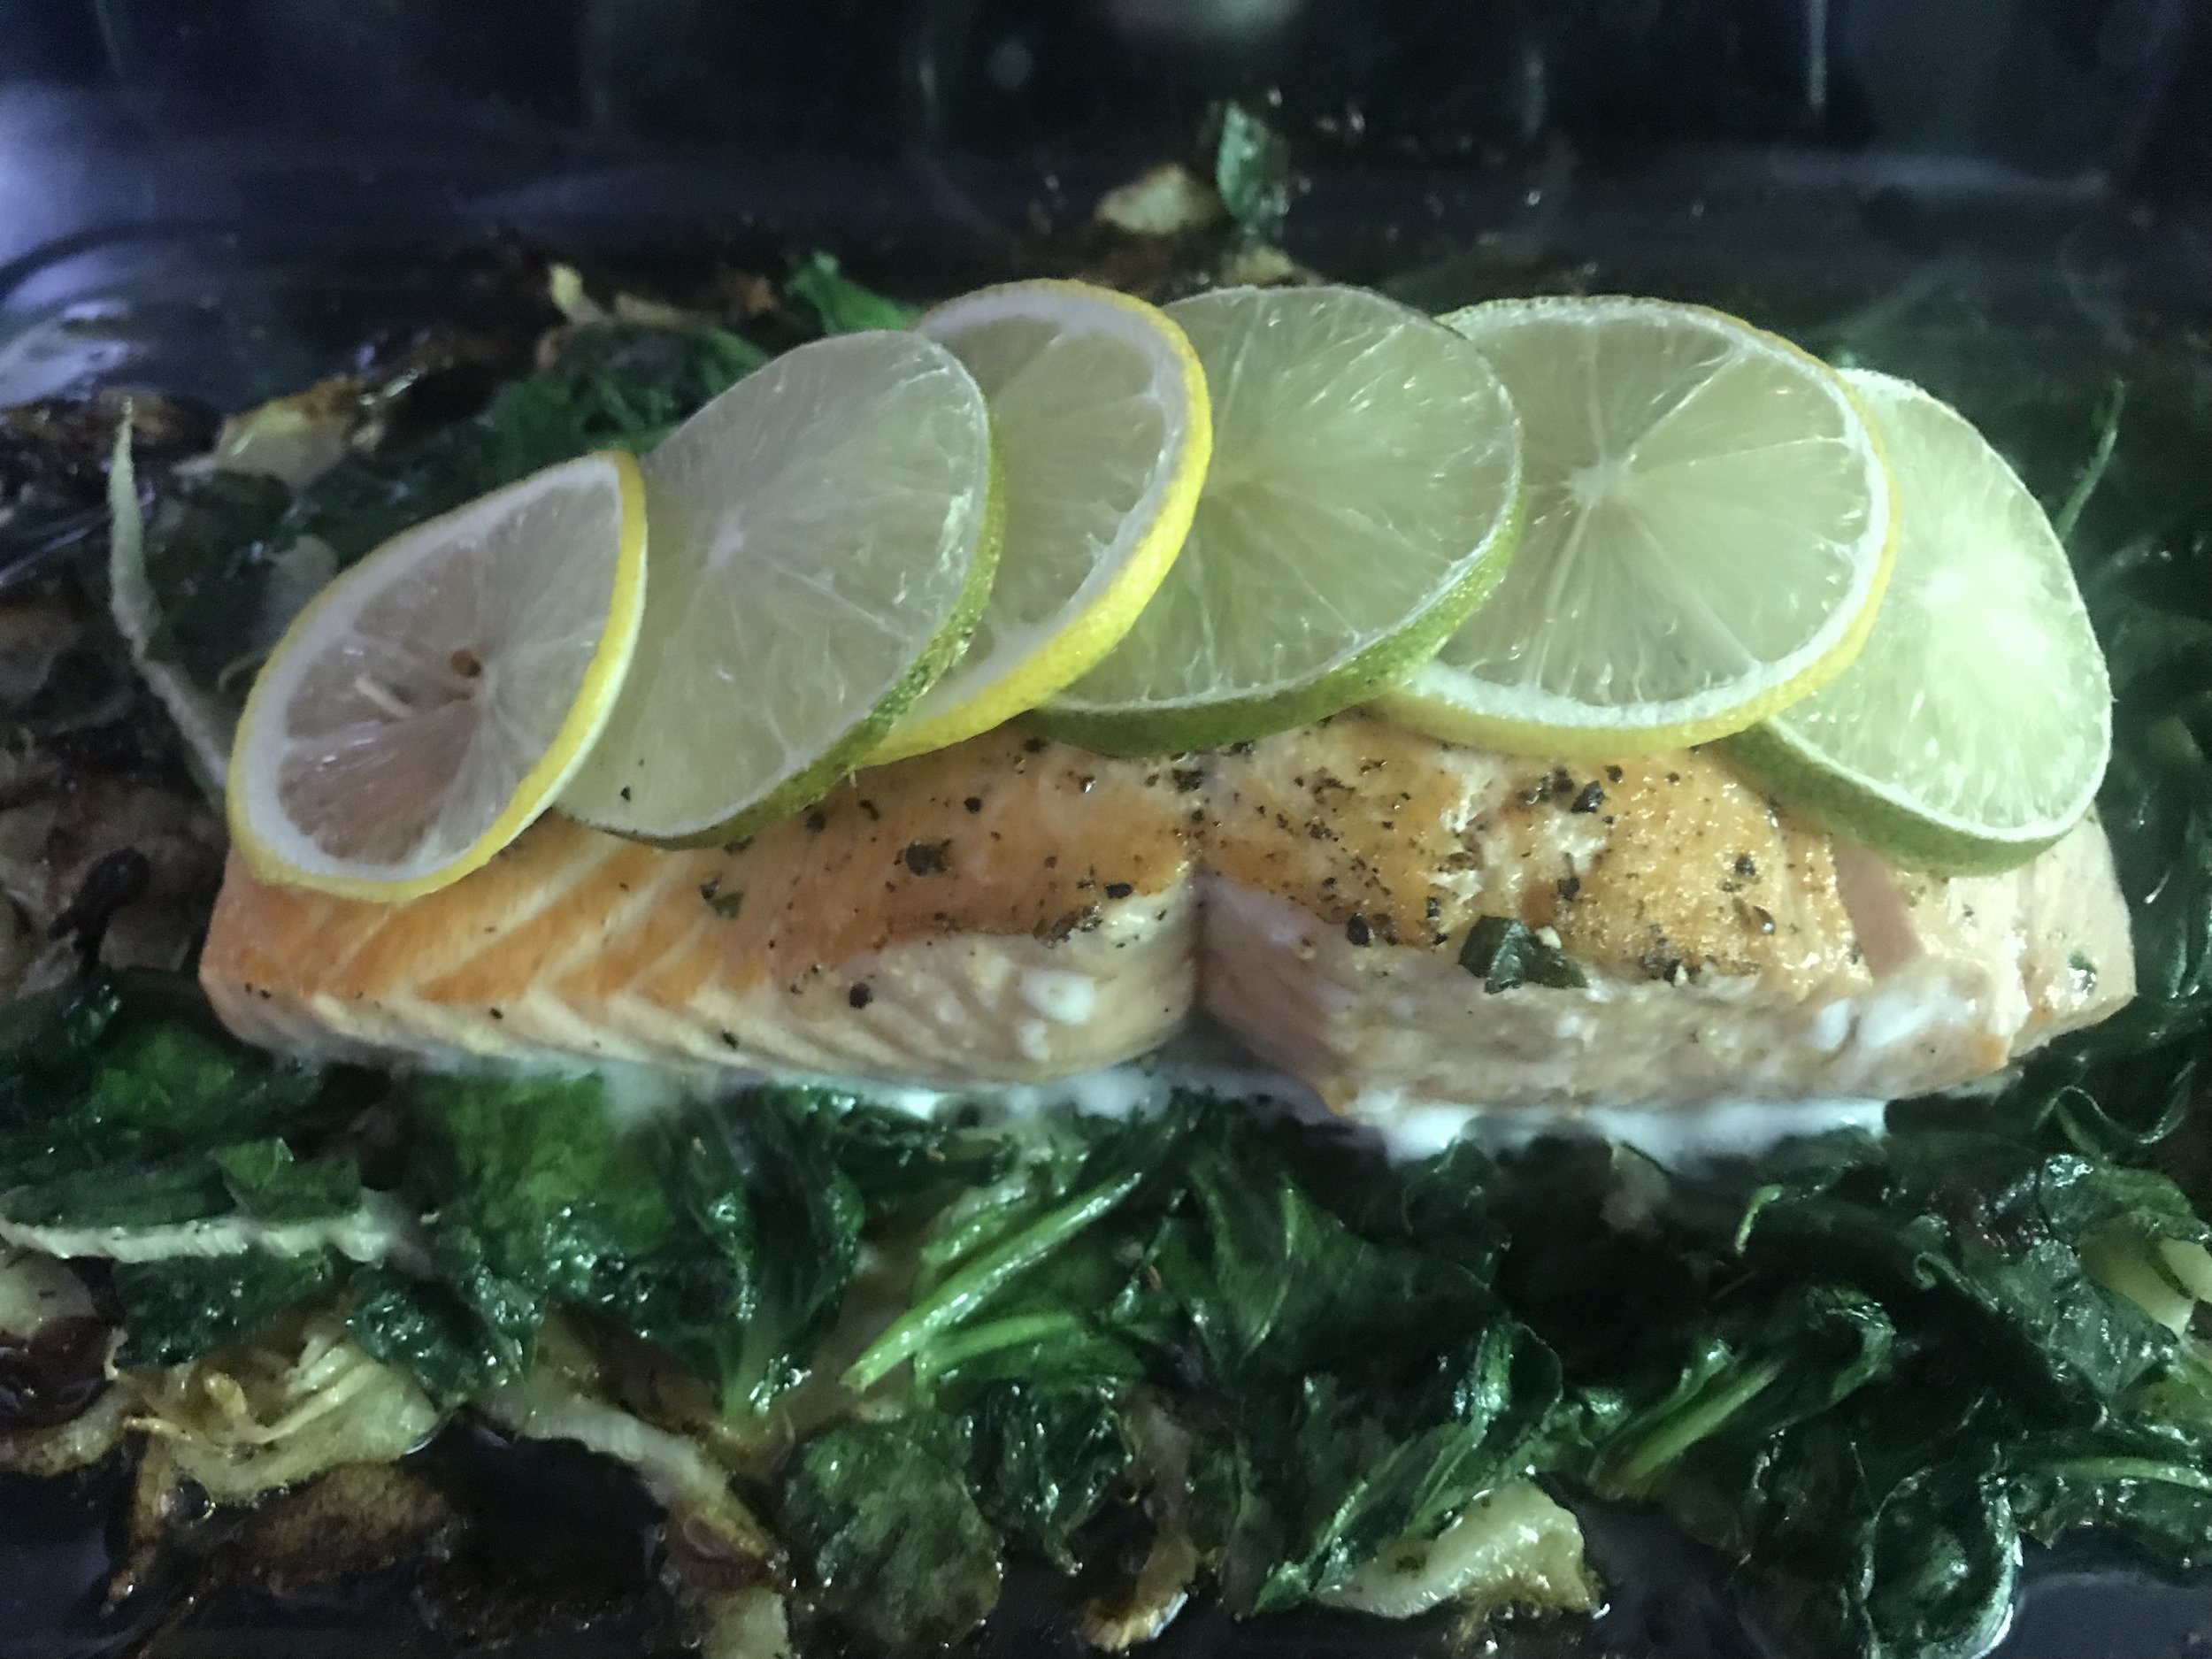  Salmon with citrus marinade pan seared on a bed or power greens and mushrooms.  